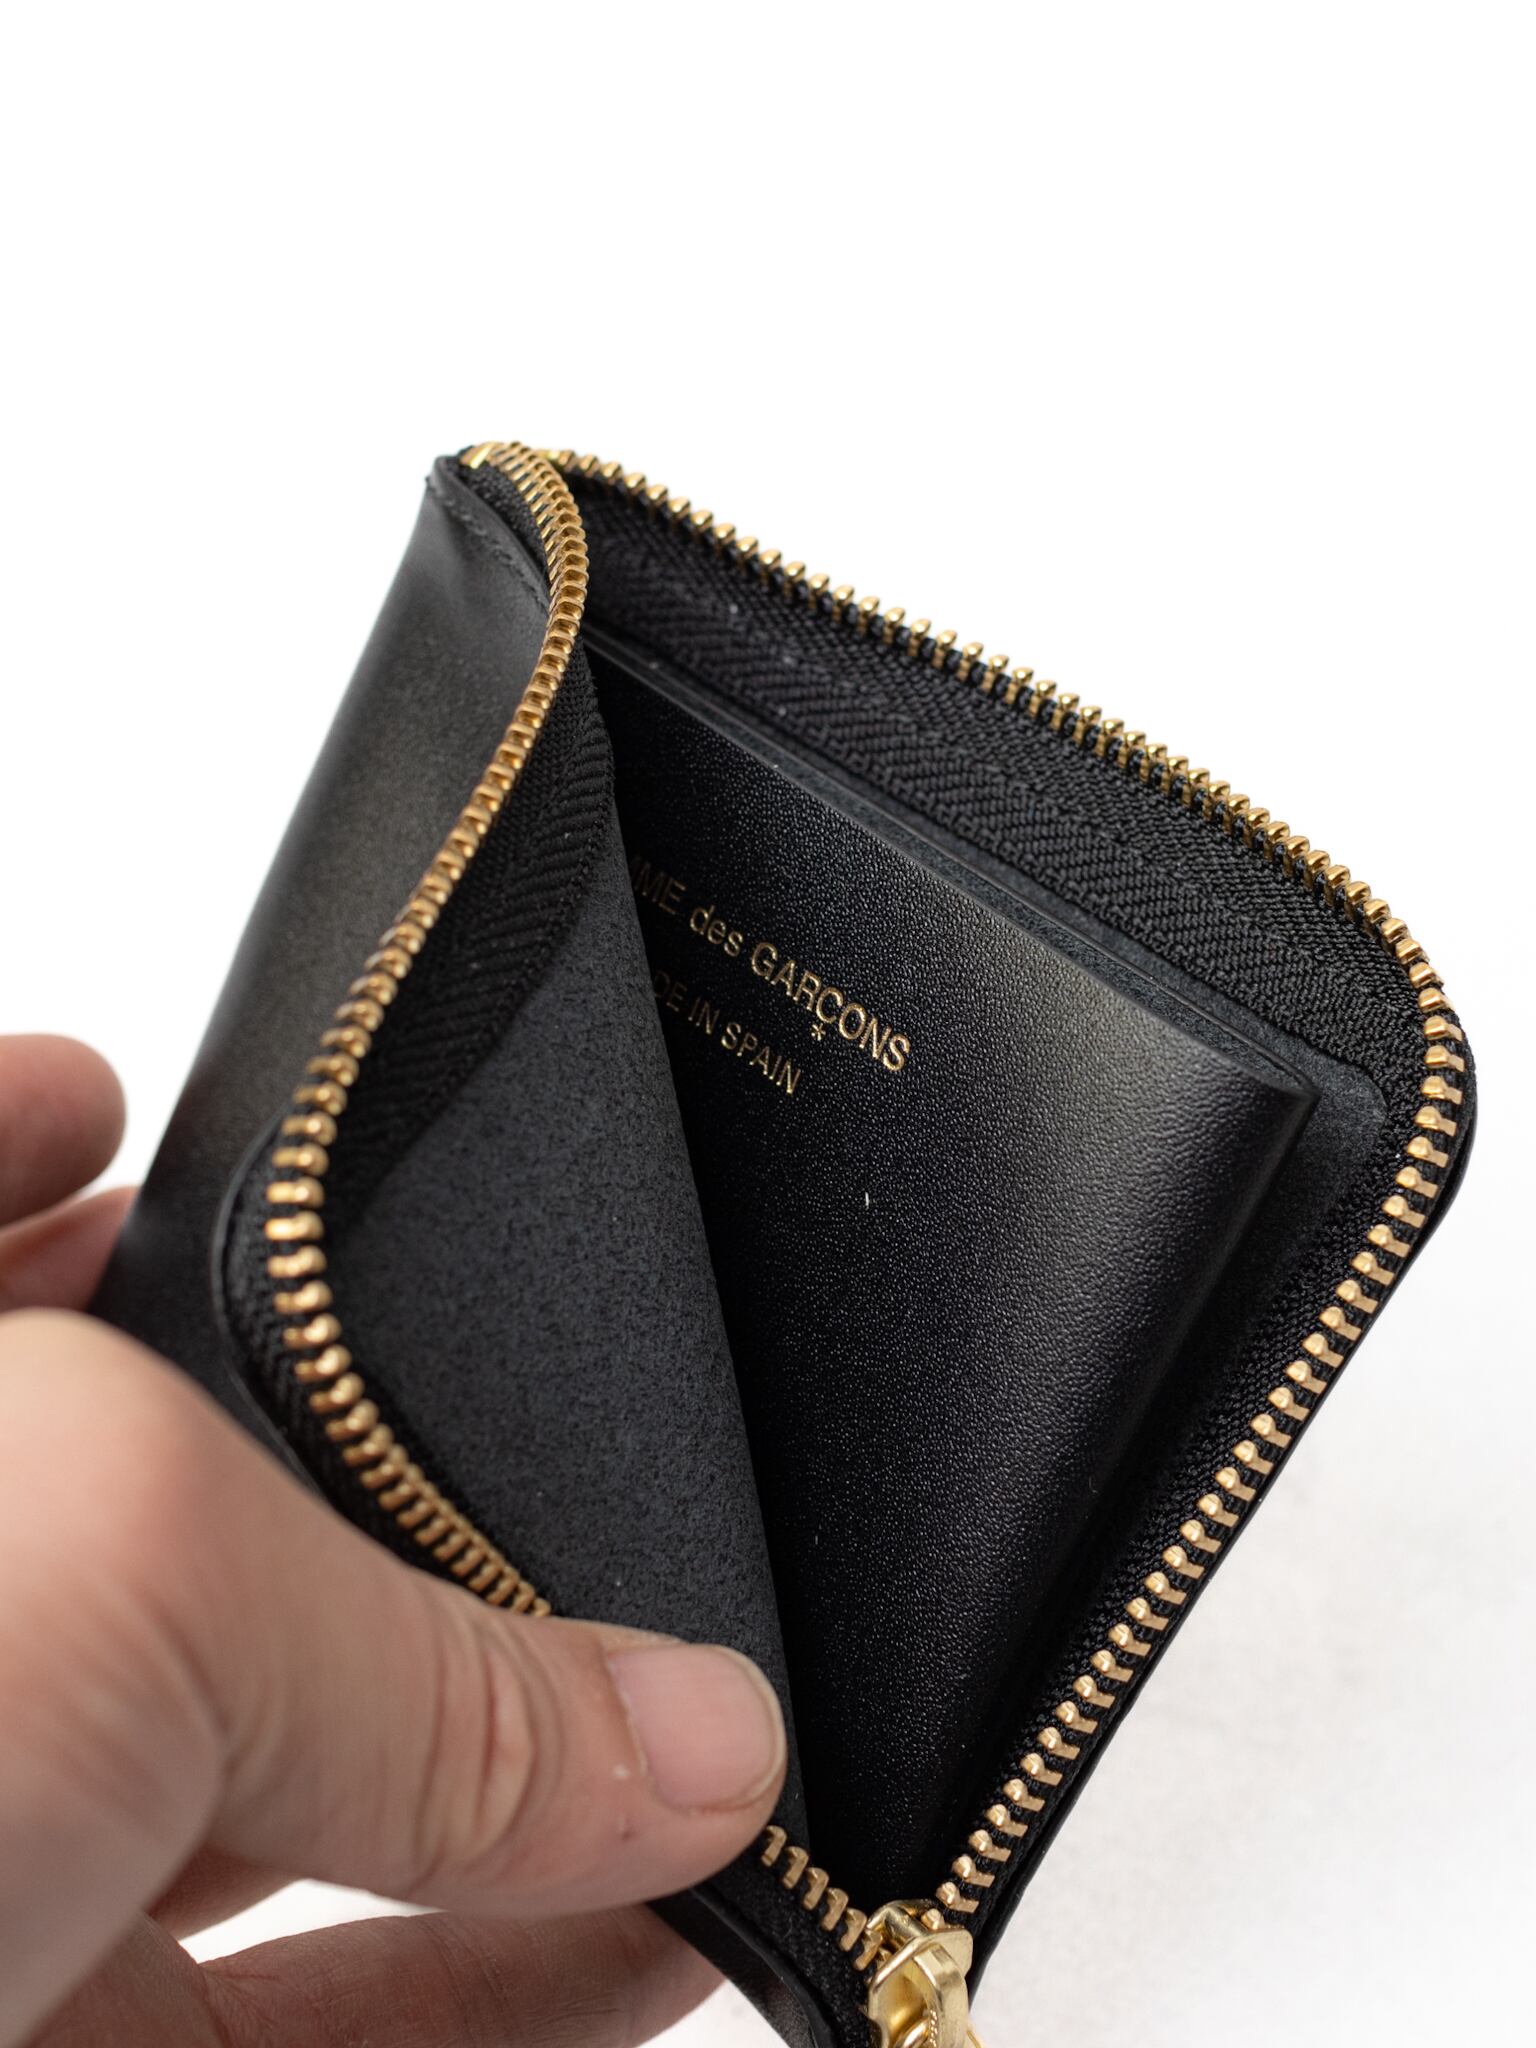 Wallet COMME des GARCONS L字ZIPウォレット | Glayage KYOTO powered by BASE